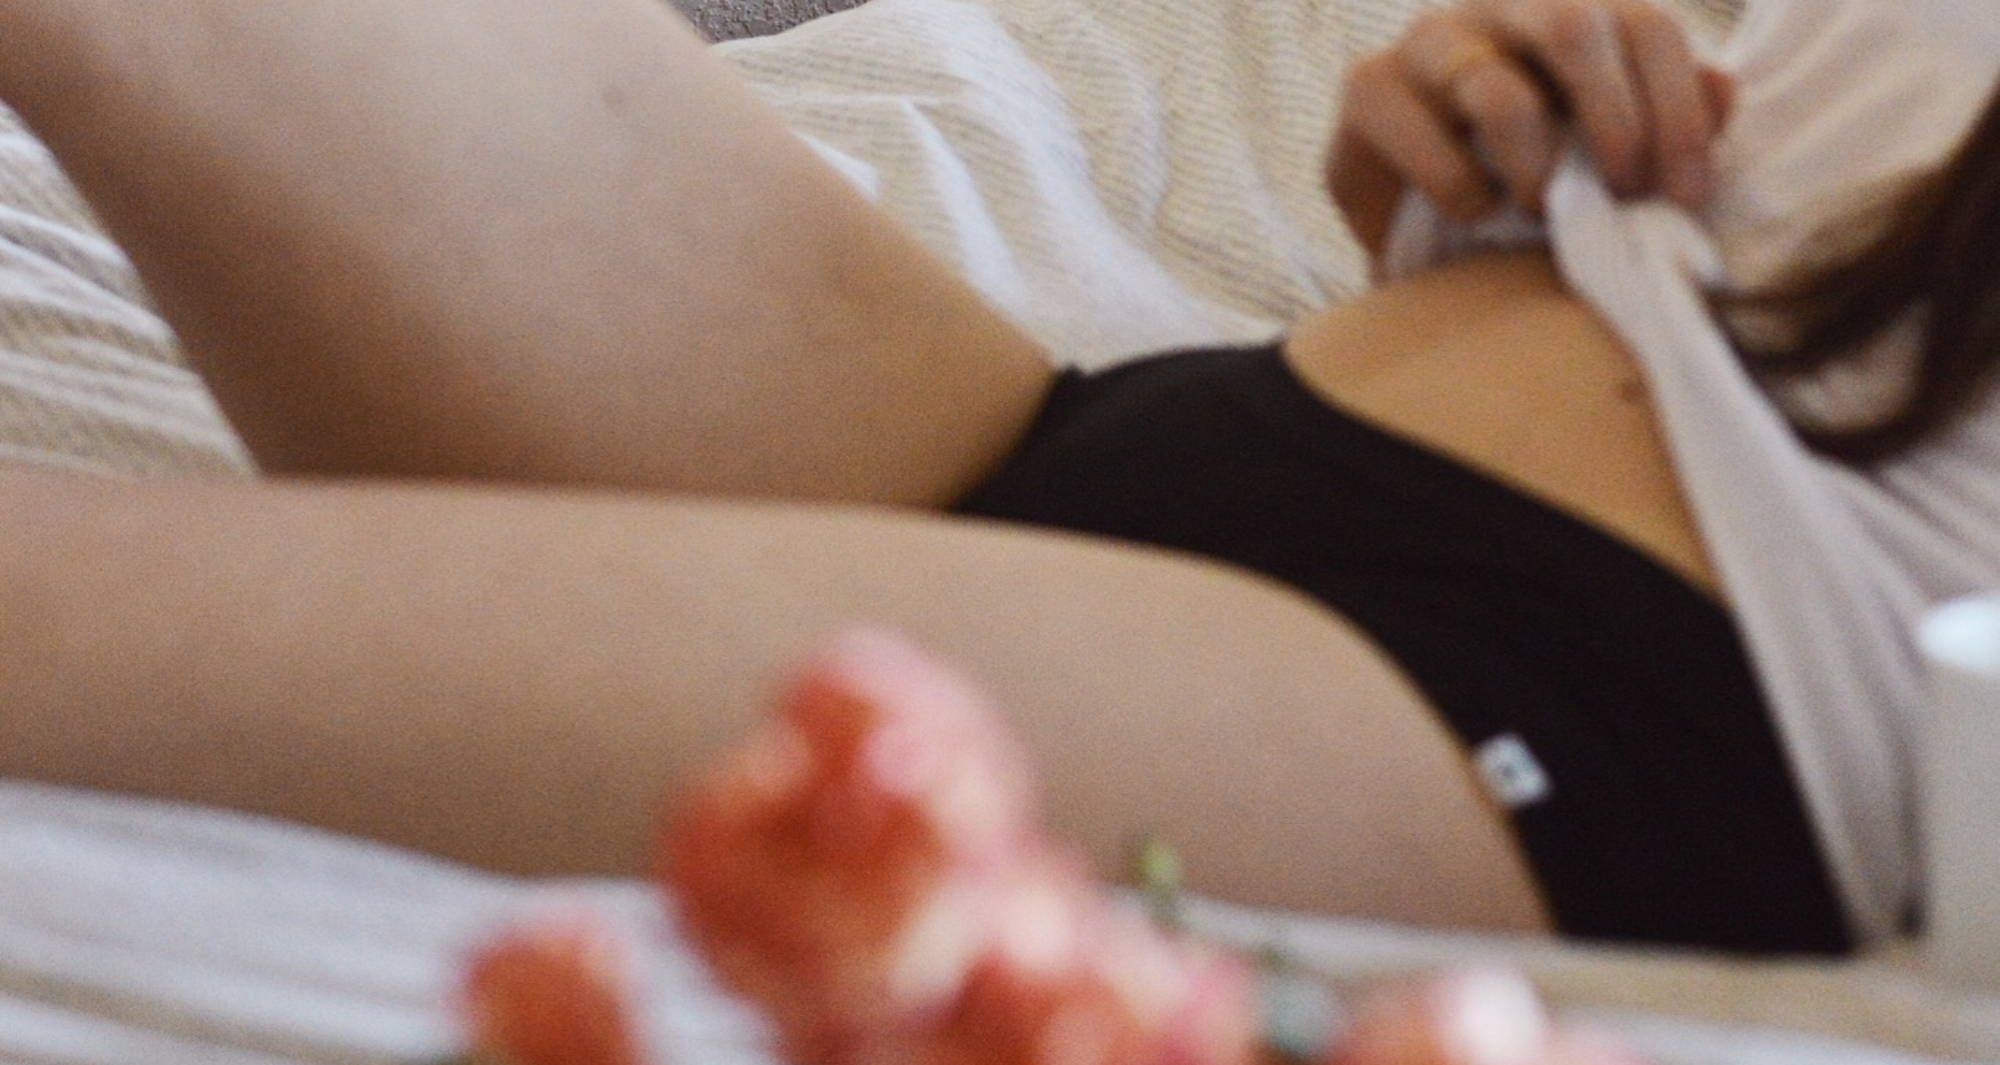 A woman lays on a bed, wearing black underwear and a white tee, with roses in the forefront.